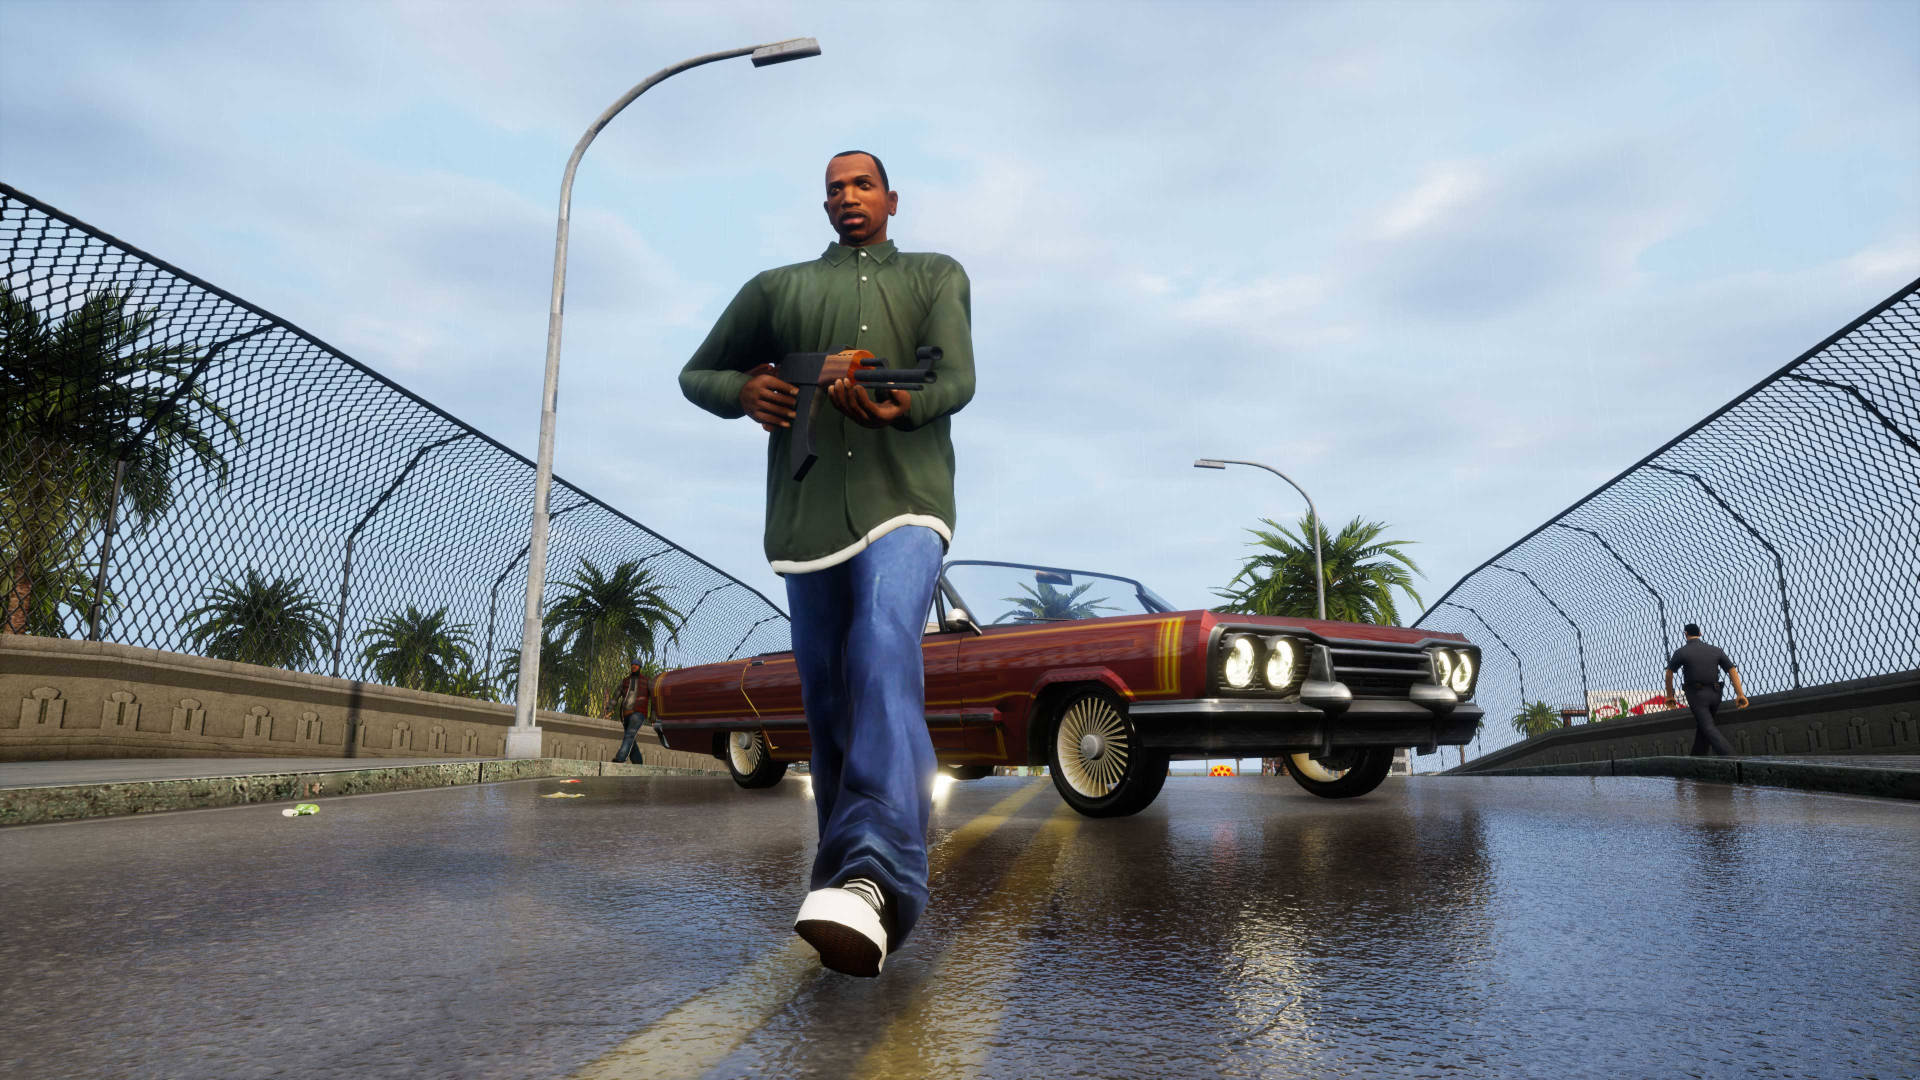 AetherSX2) does anyone know a patch code for gta san andreas to